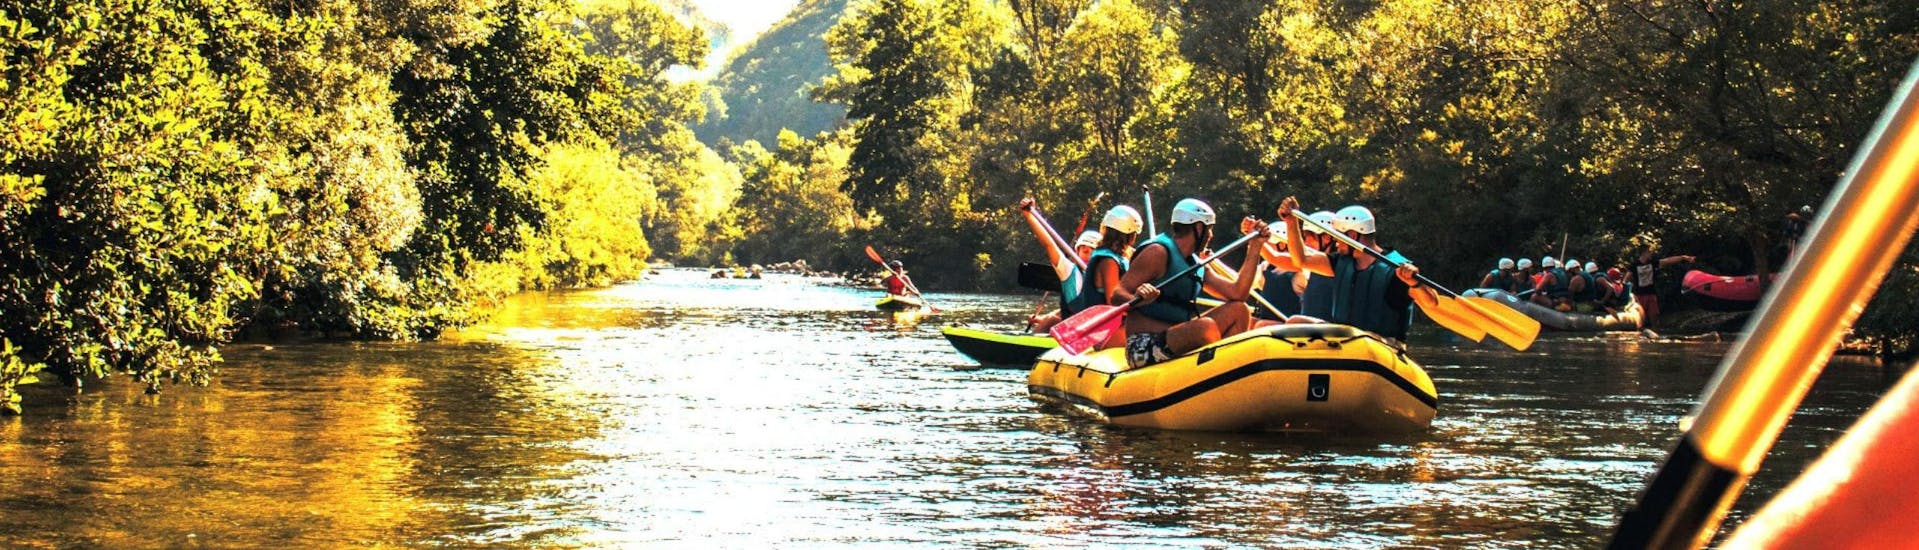 A group of people is pictured while rafting on the Cetina River.